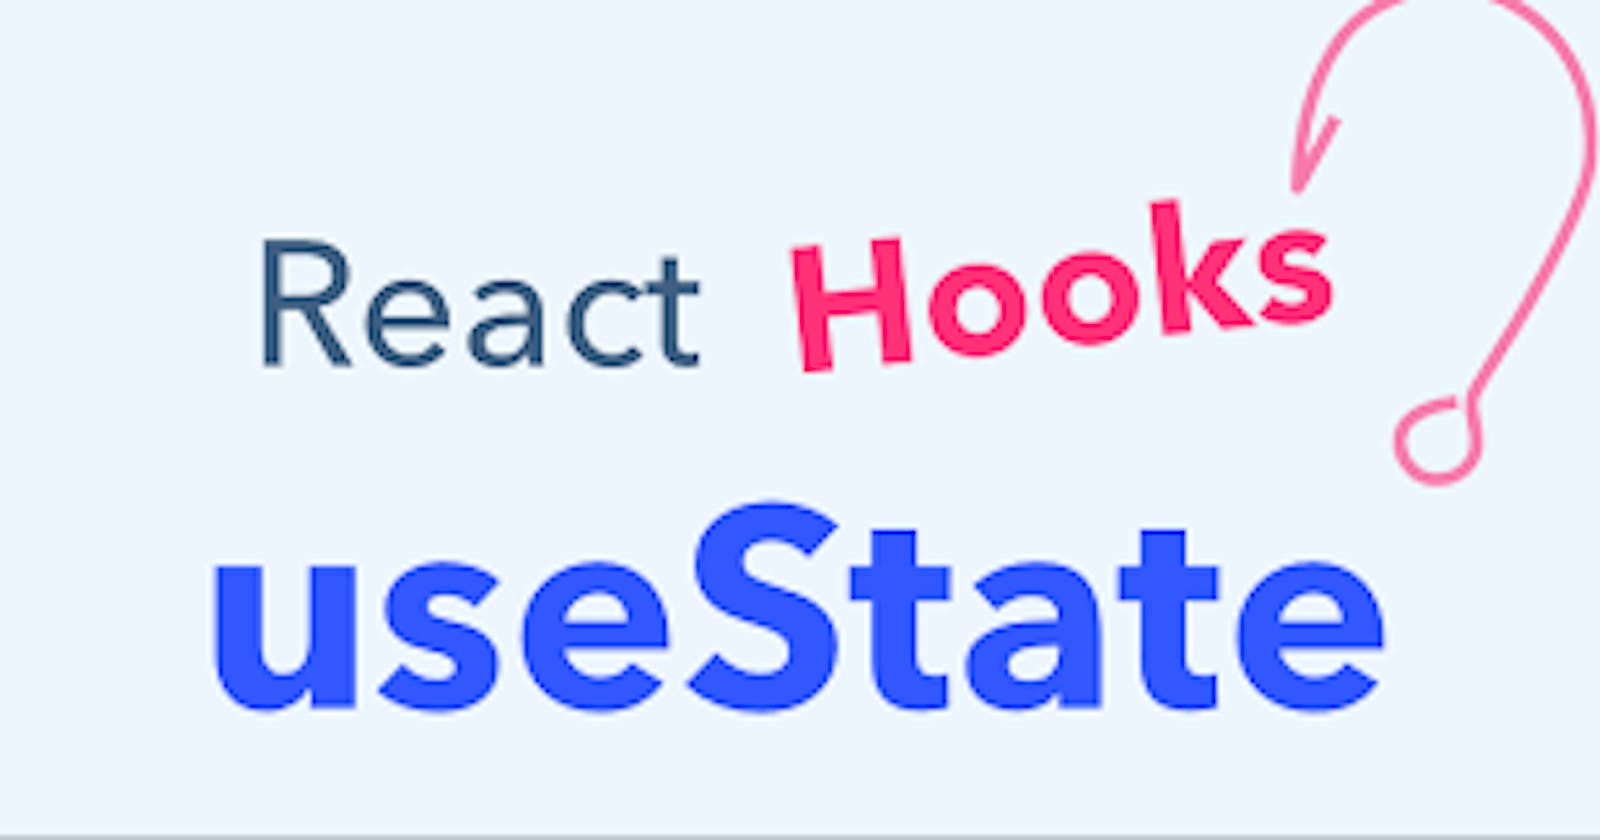 Master UseState Hook by Building Simple Apps with React